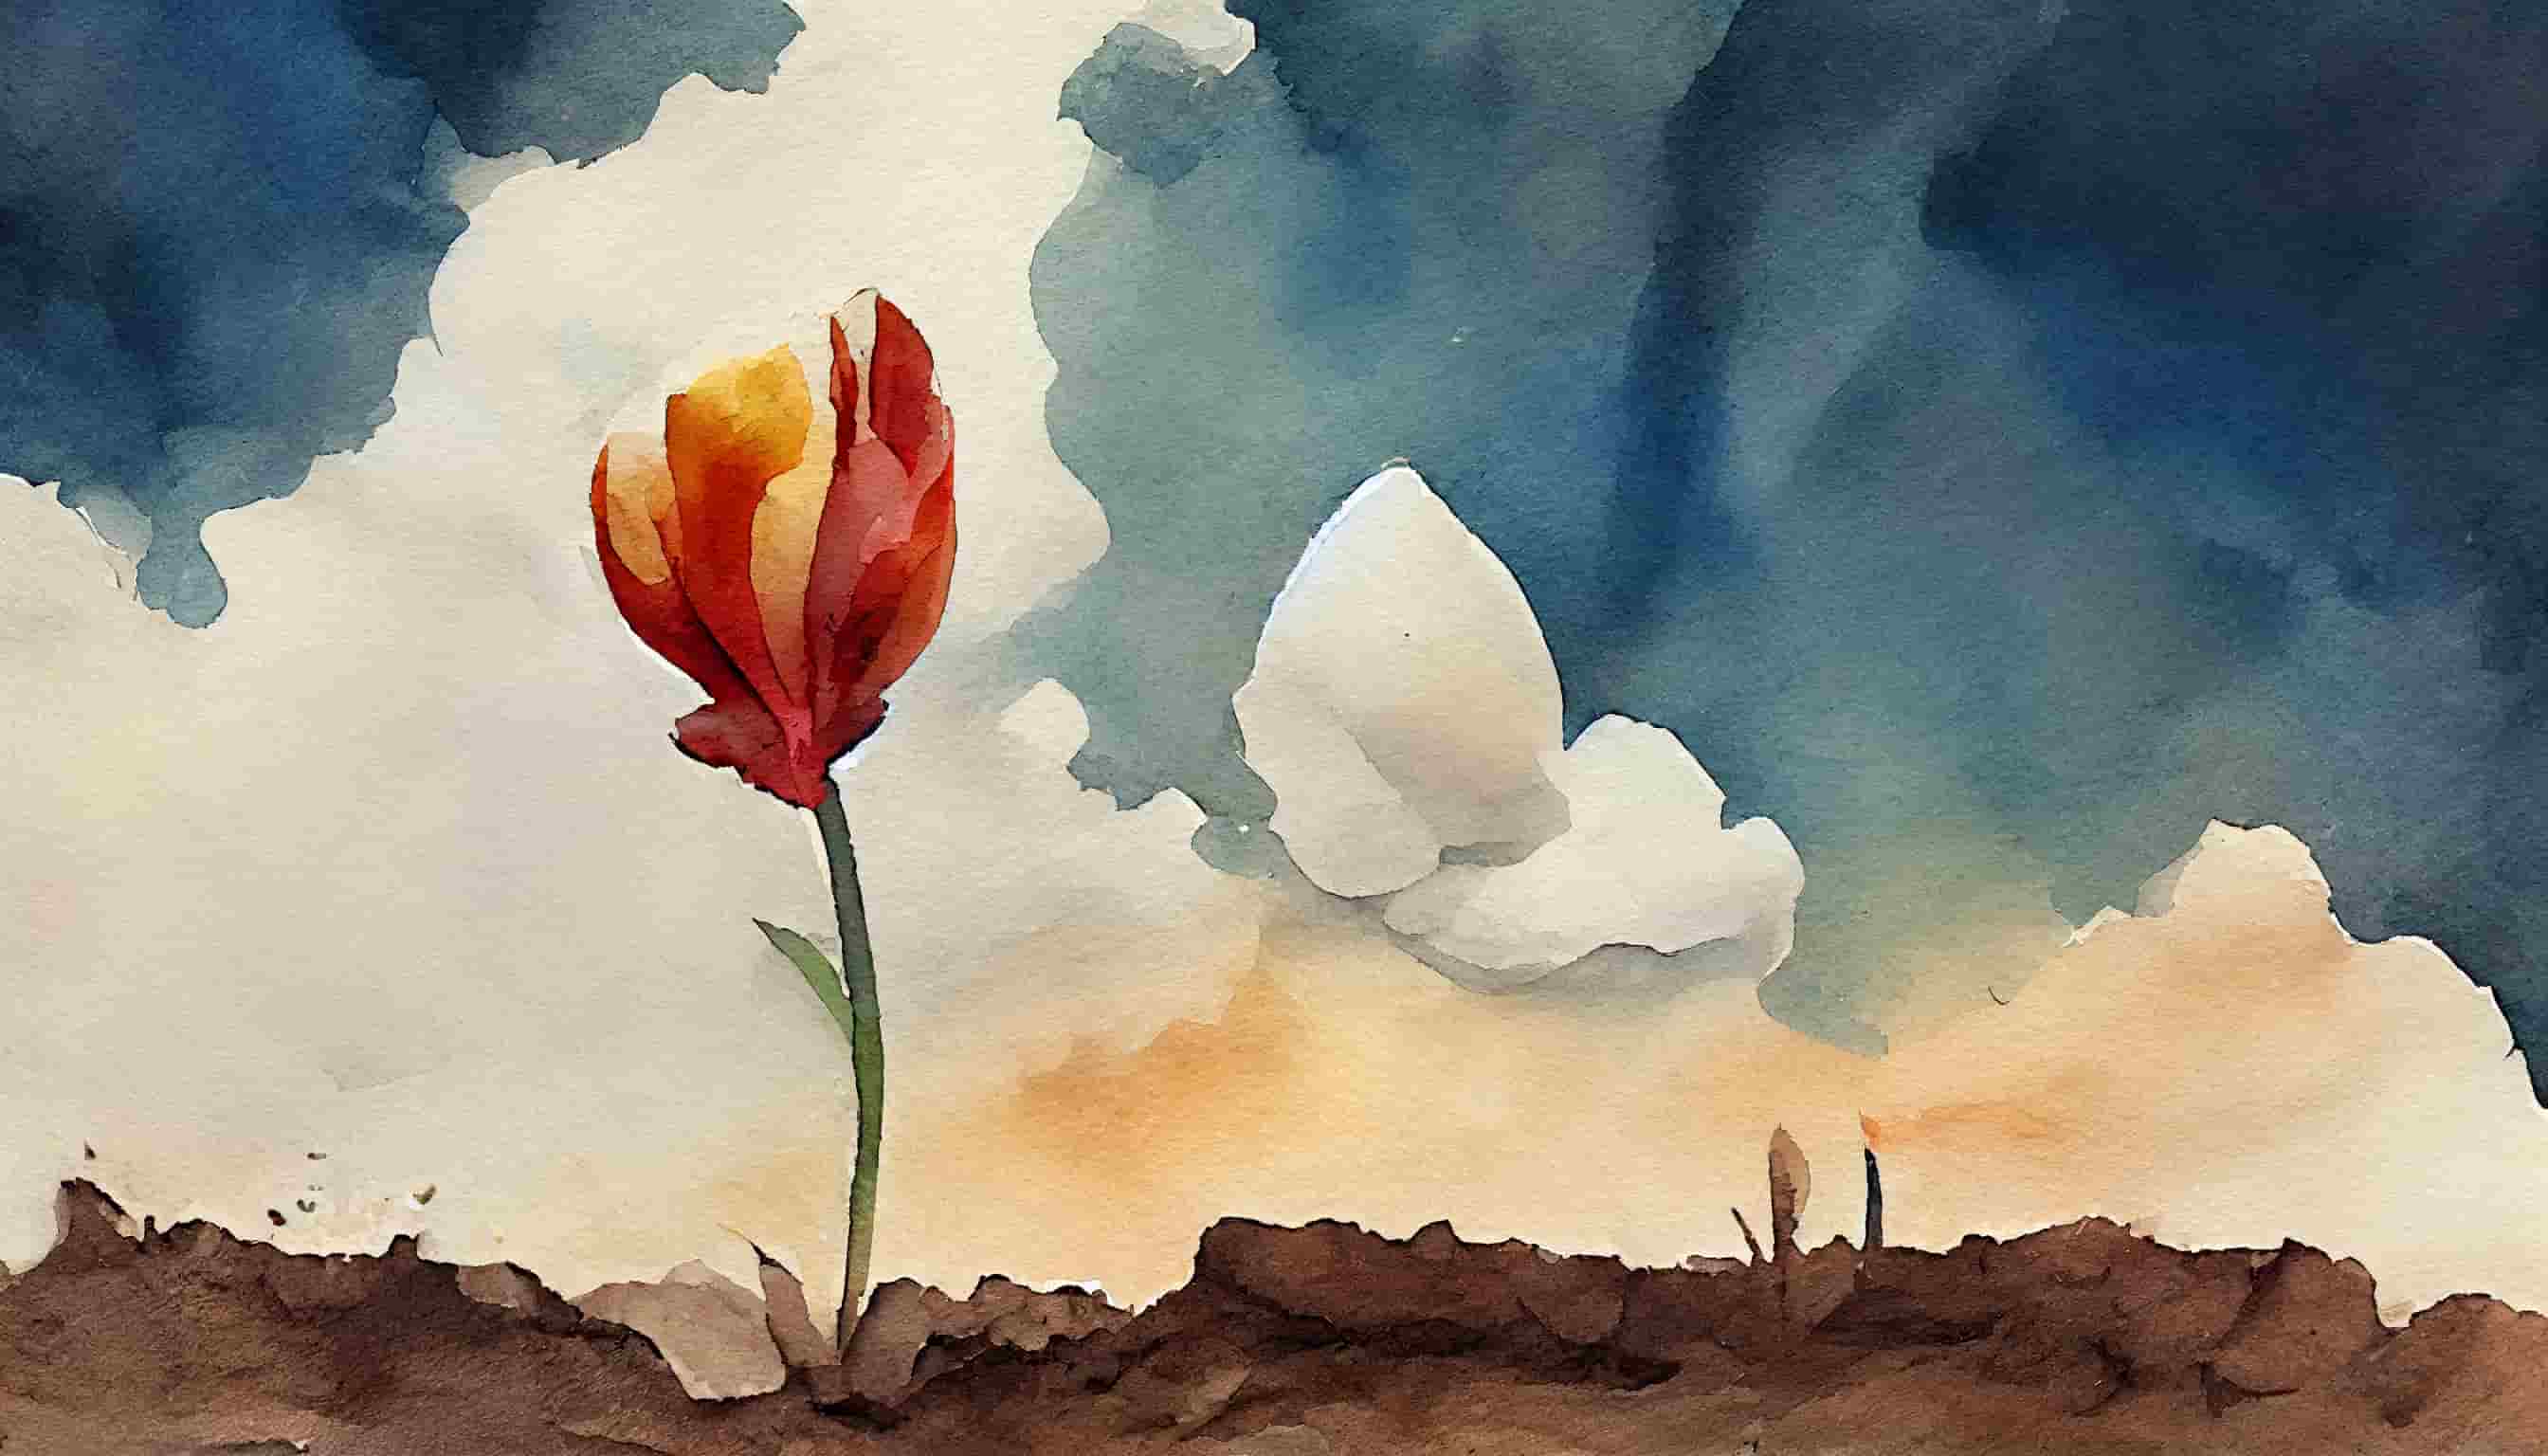 watercolor a single lonely tulip growing from dry dirt with clouds in the background